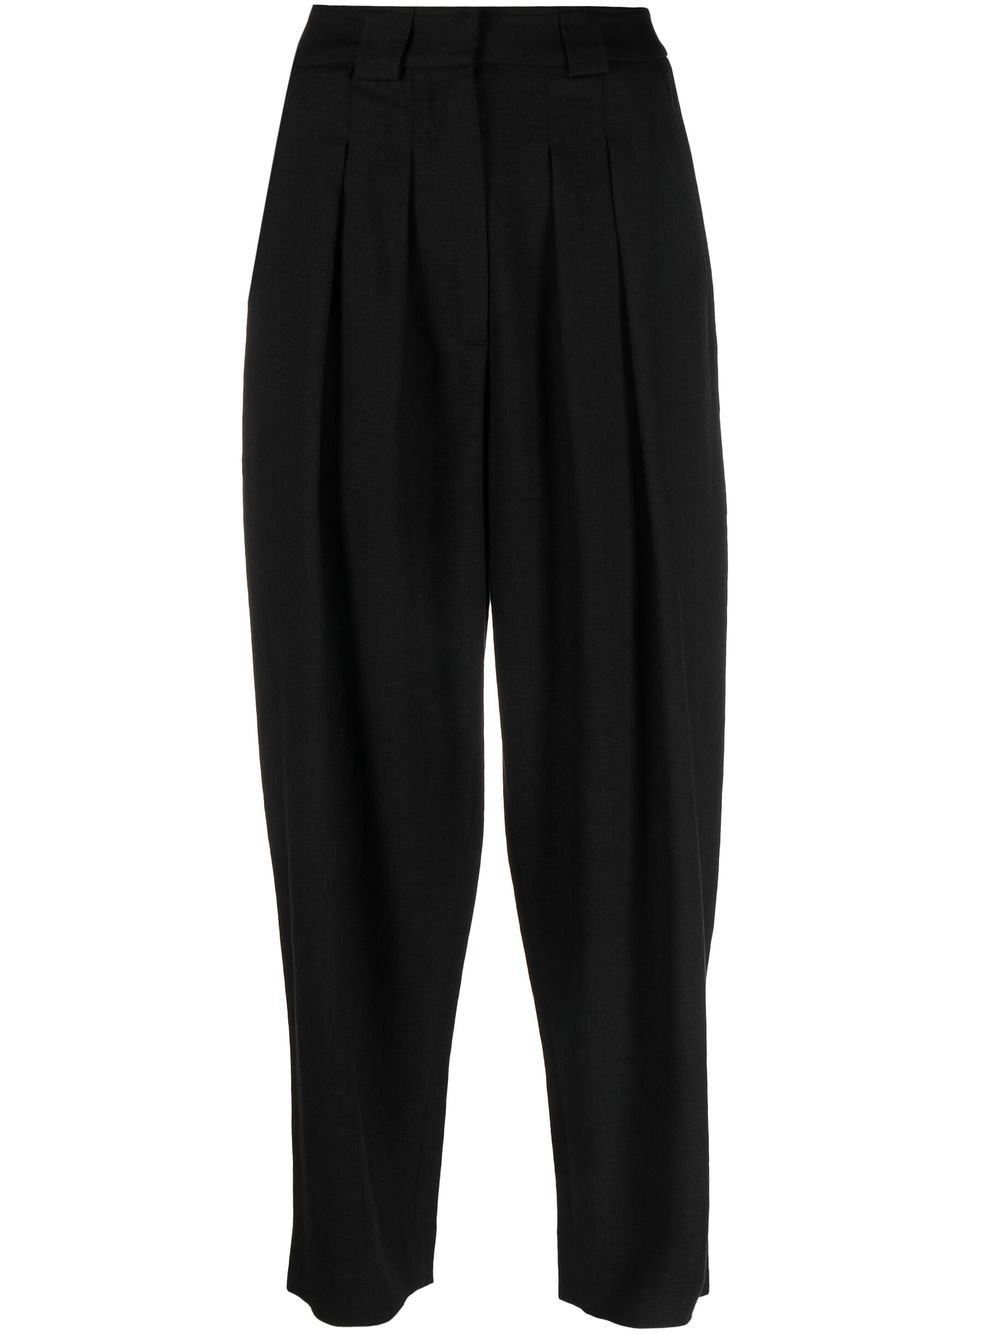 FRAME pleated high-waisted trousers - Black von FRAME